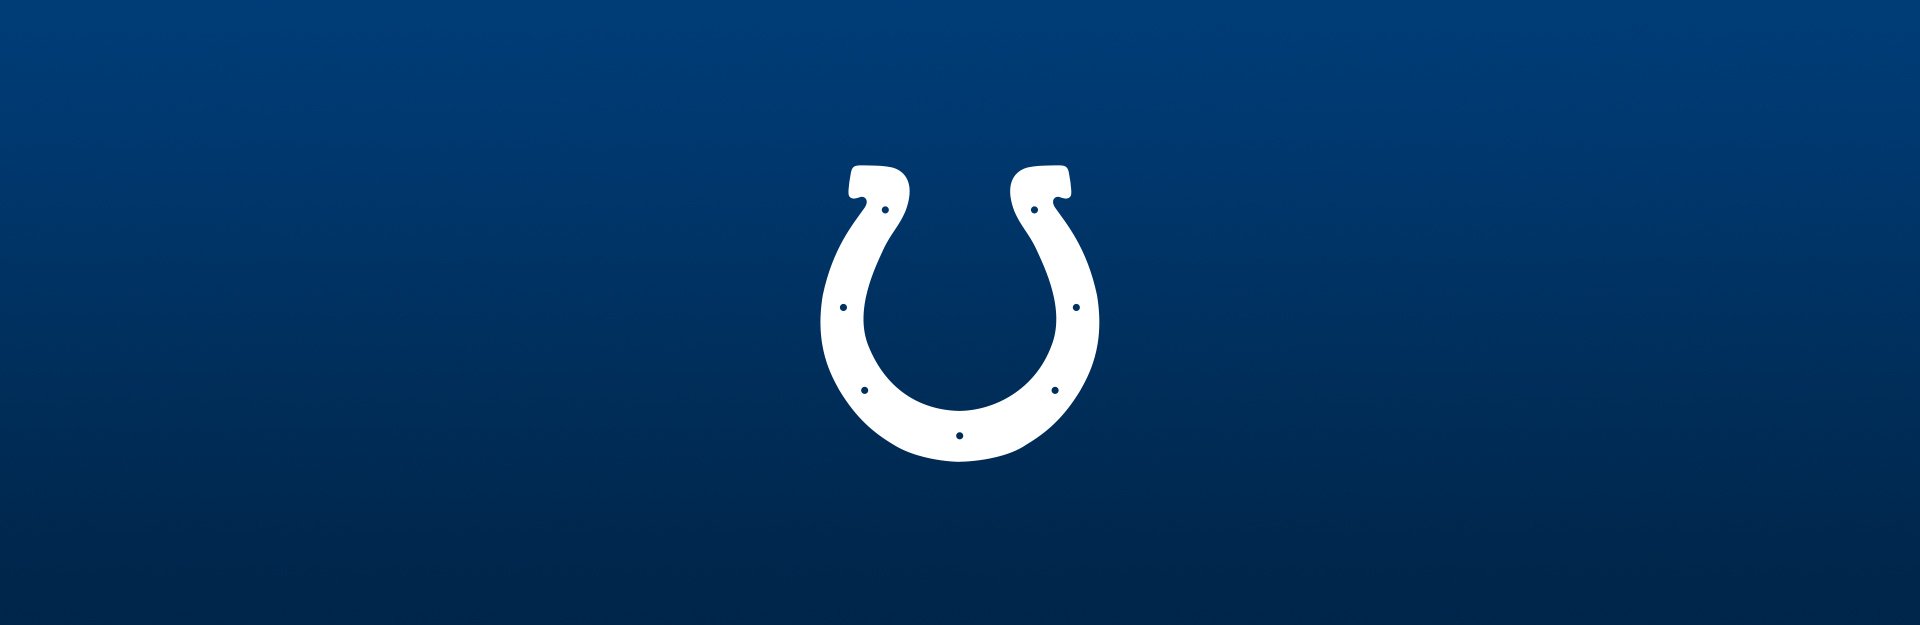 Indianapolis Colts logo on blue background